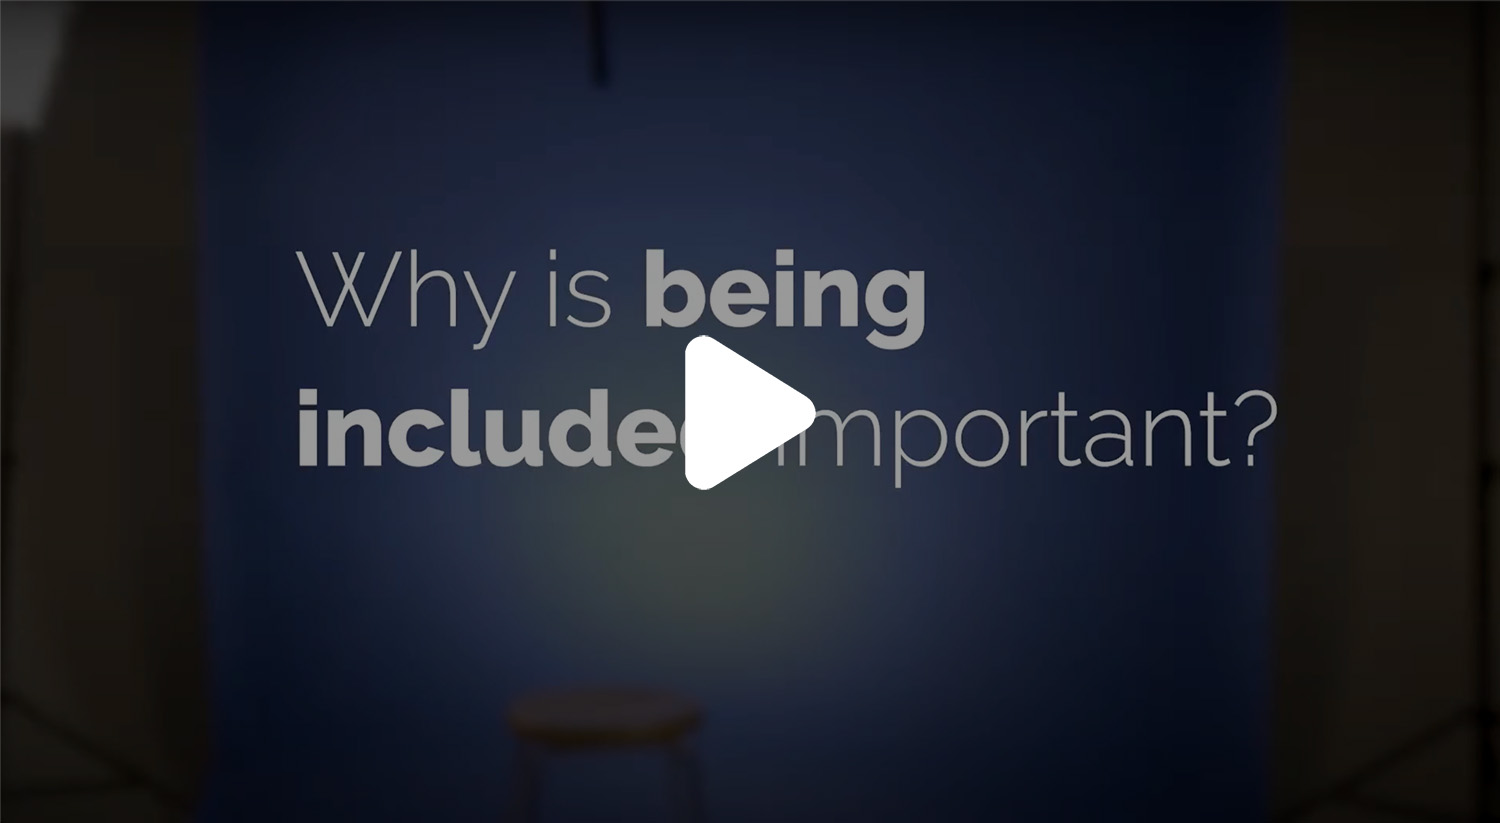 Why is being included important?